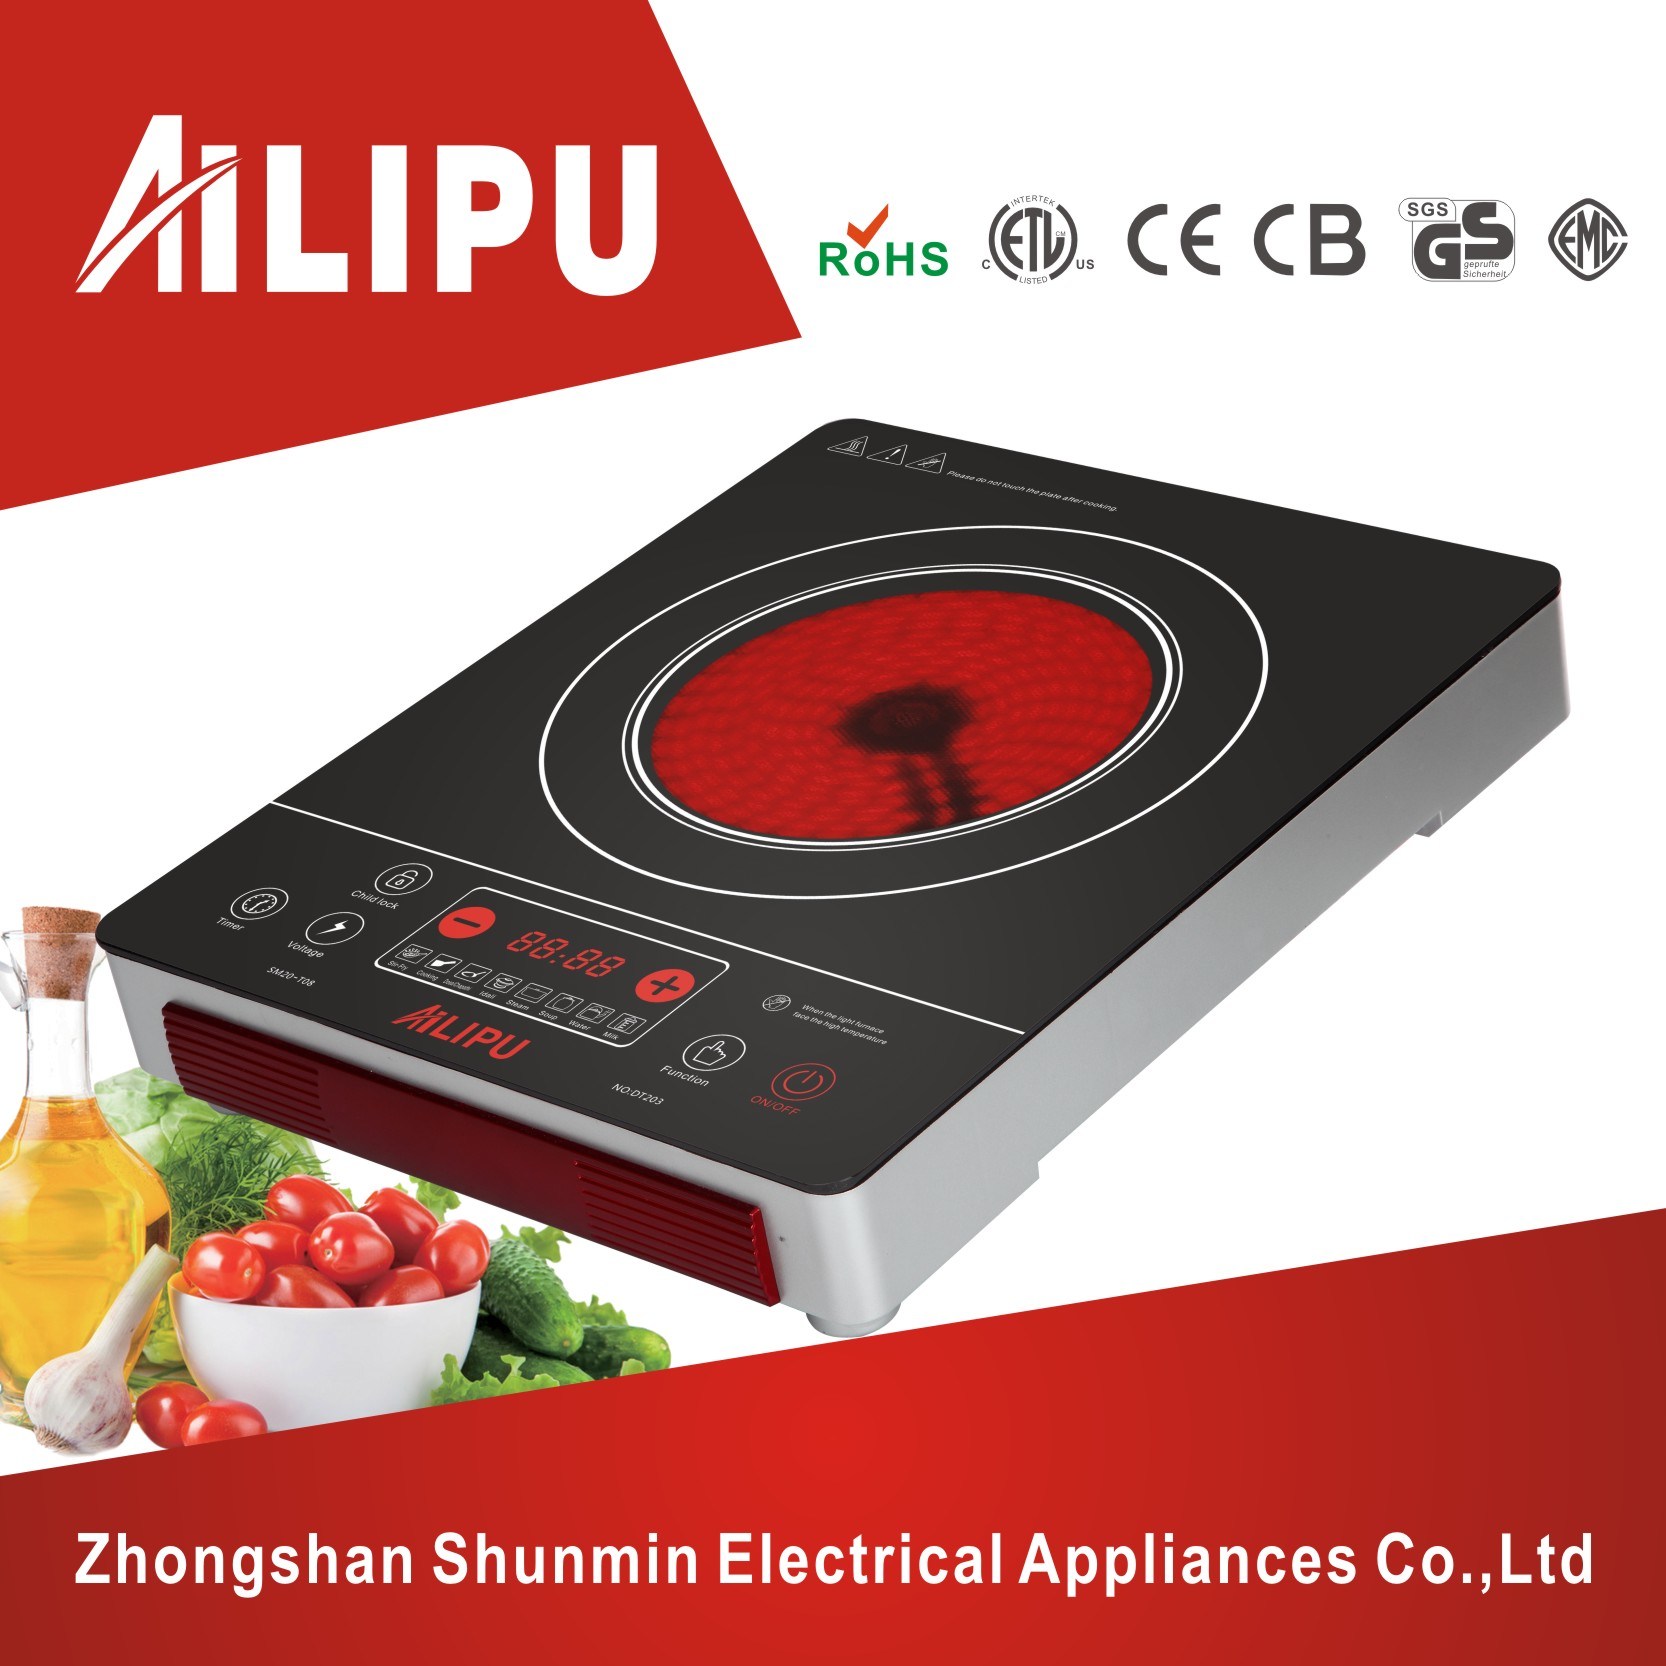 Suitable for Any Pot, CB Certificate and Plastich Housing Touch Screen Infrared Cooker